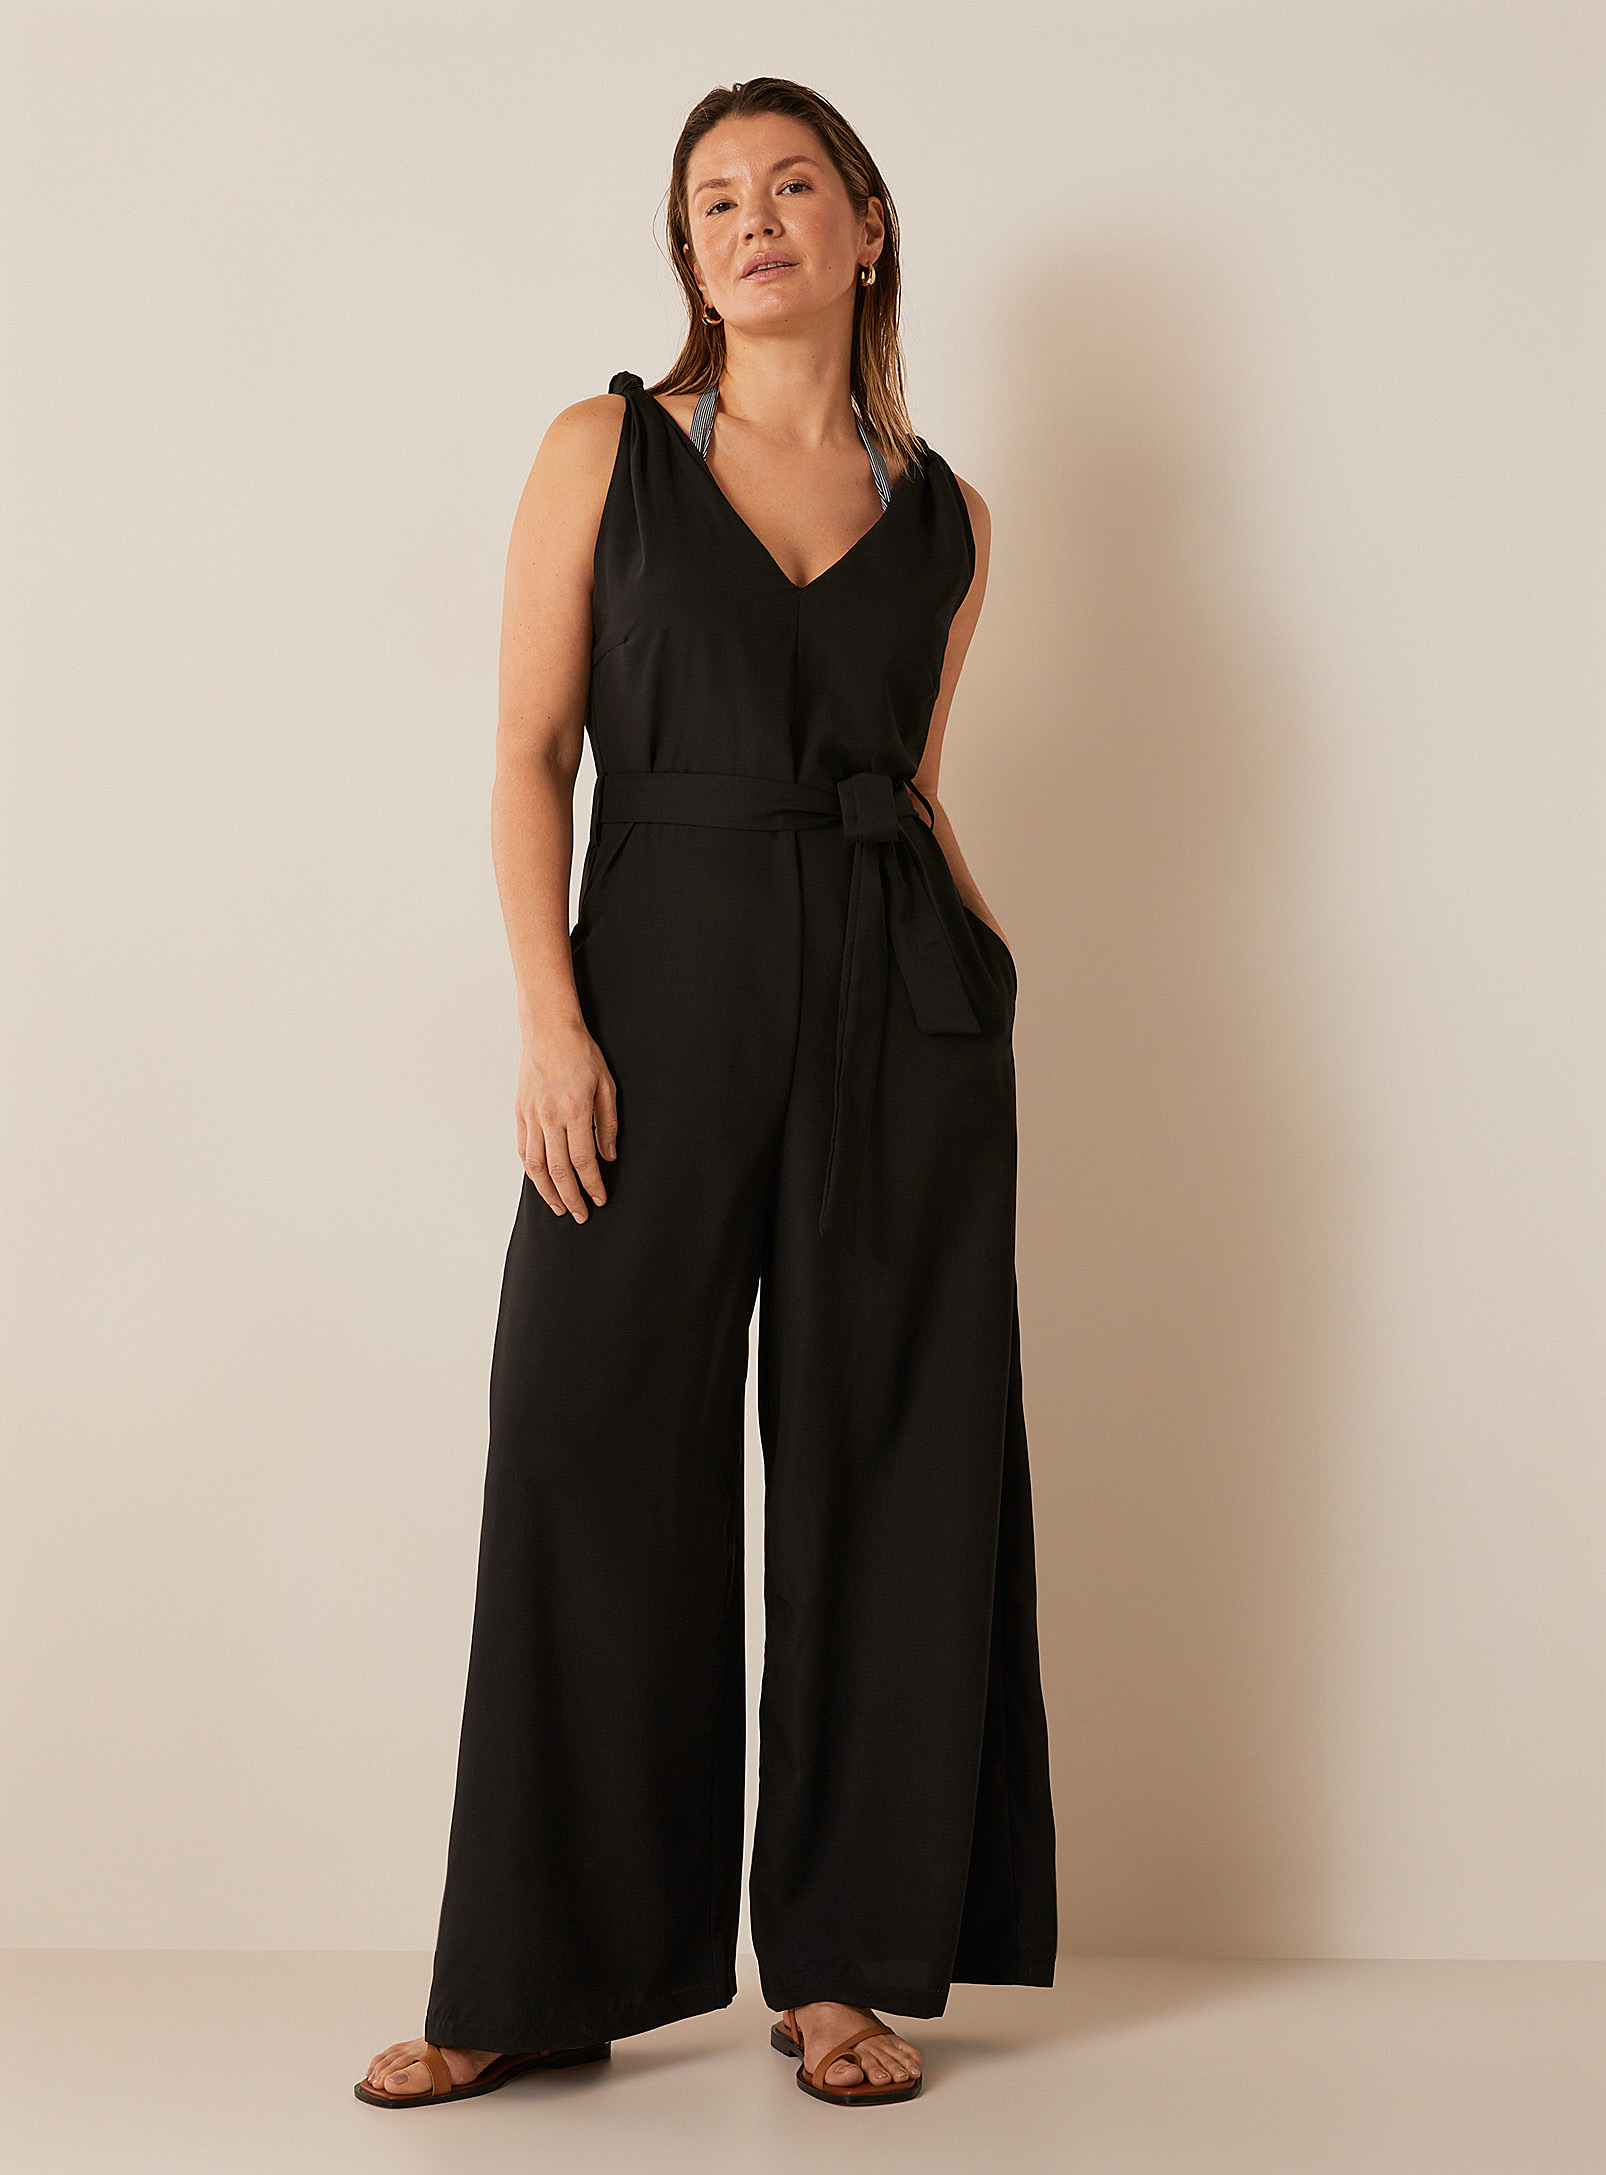 Byron Bay Knotted Strap Beach Jumpsuit In Black